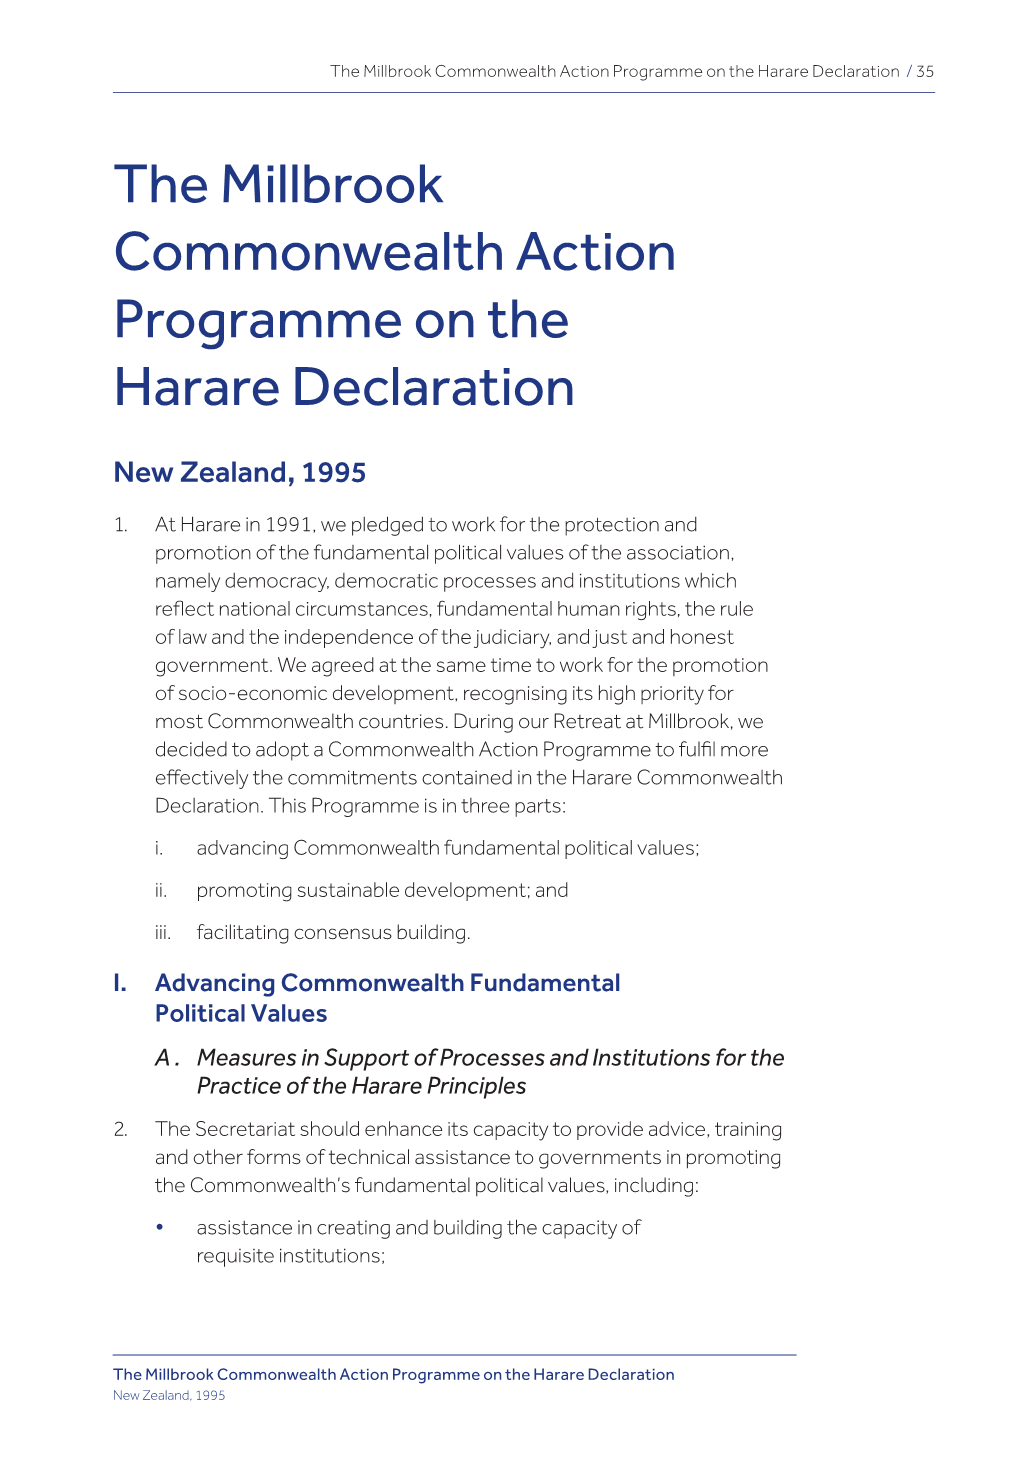 The Millbrook Commonwealth Action Programme on the Harare Declaration / 35